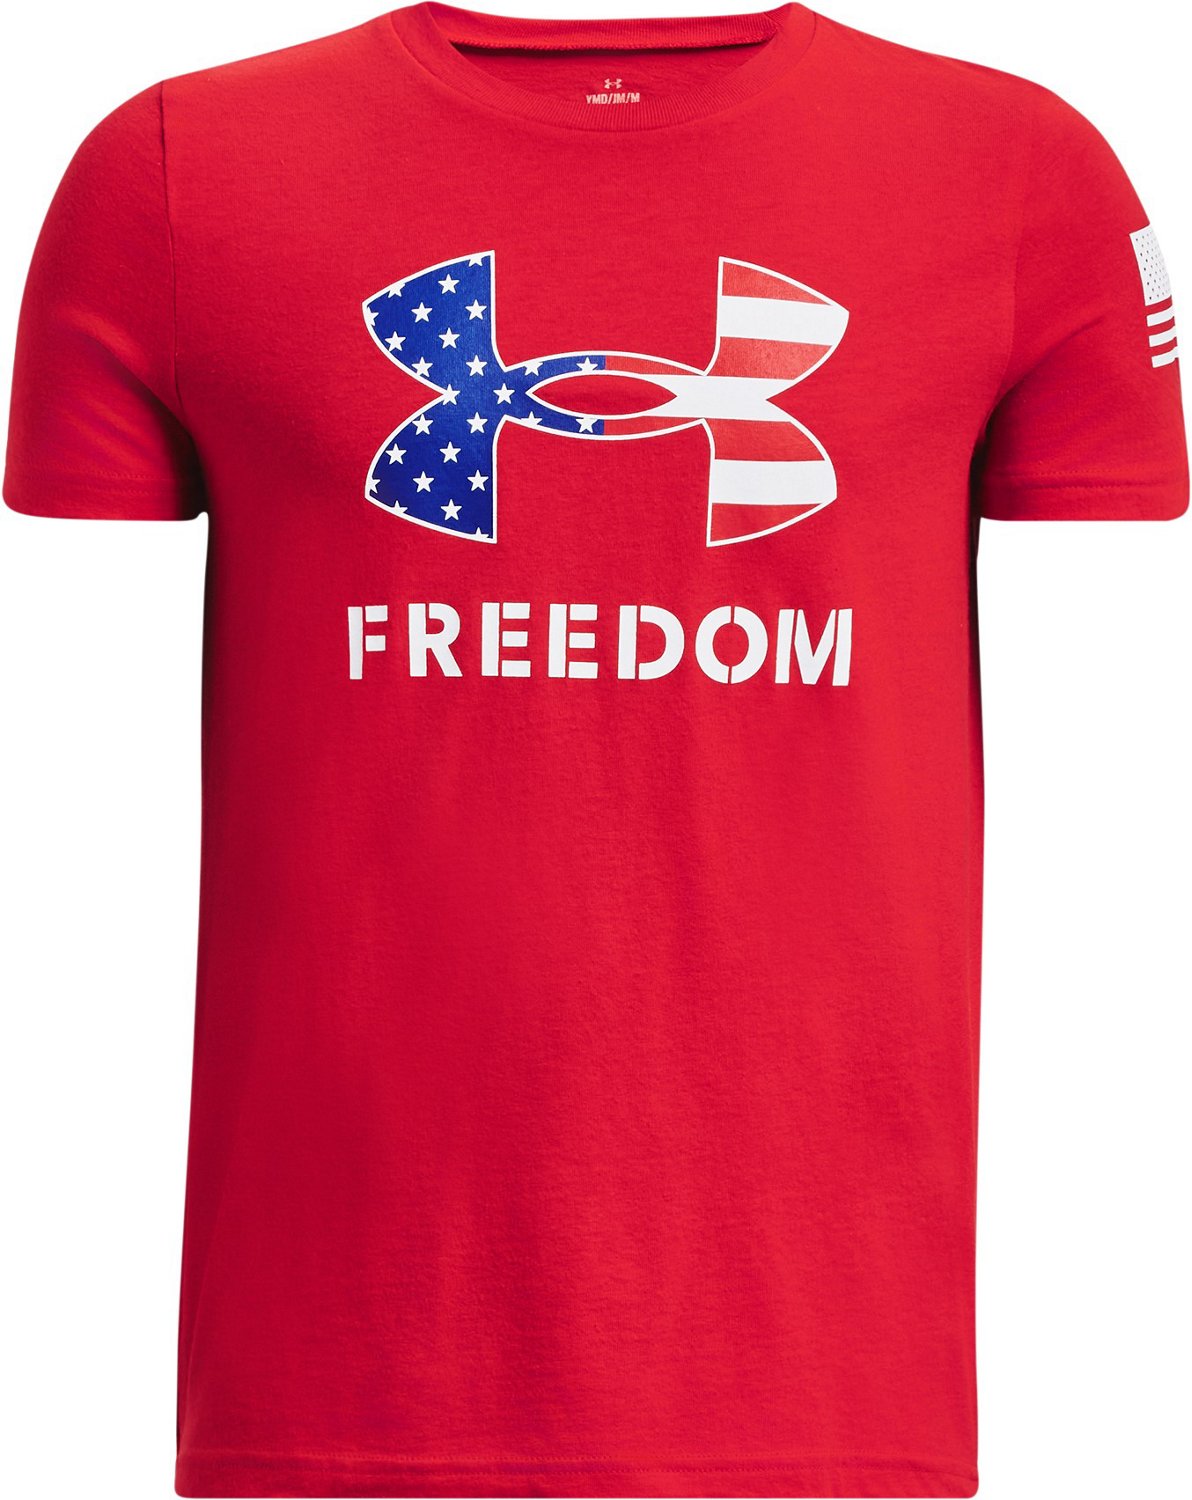  Under Armour Men's New Freedom by Sea T-Shirt, Blackout Navy  (997)/Steeltown Gold, Small : Sports & Outdoors